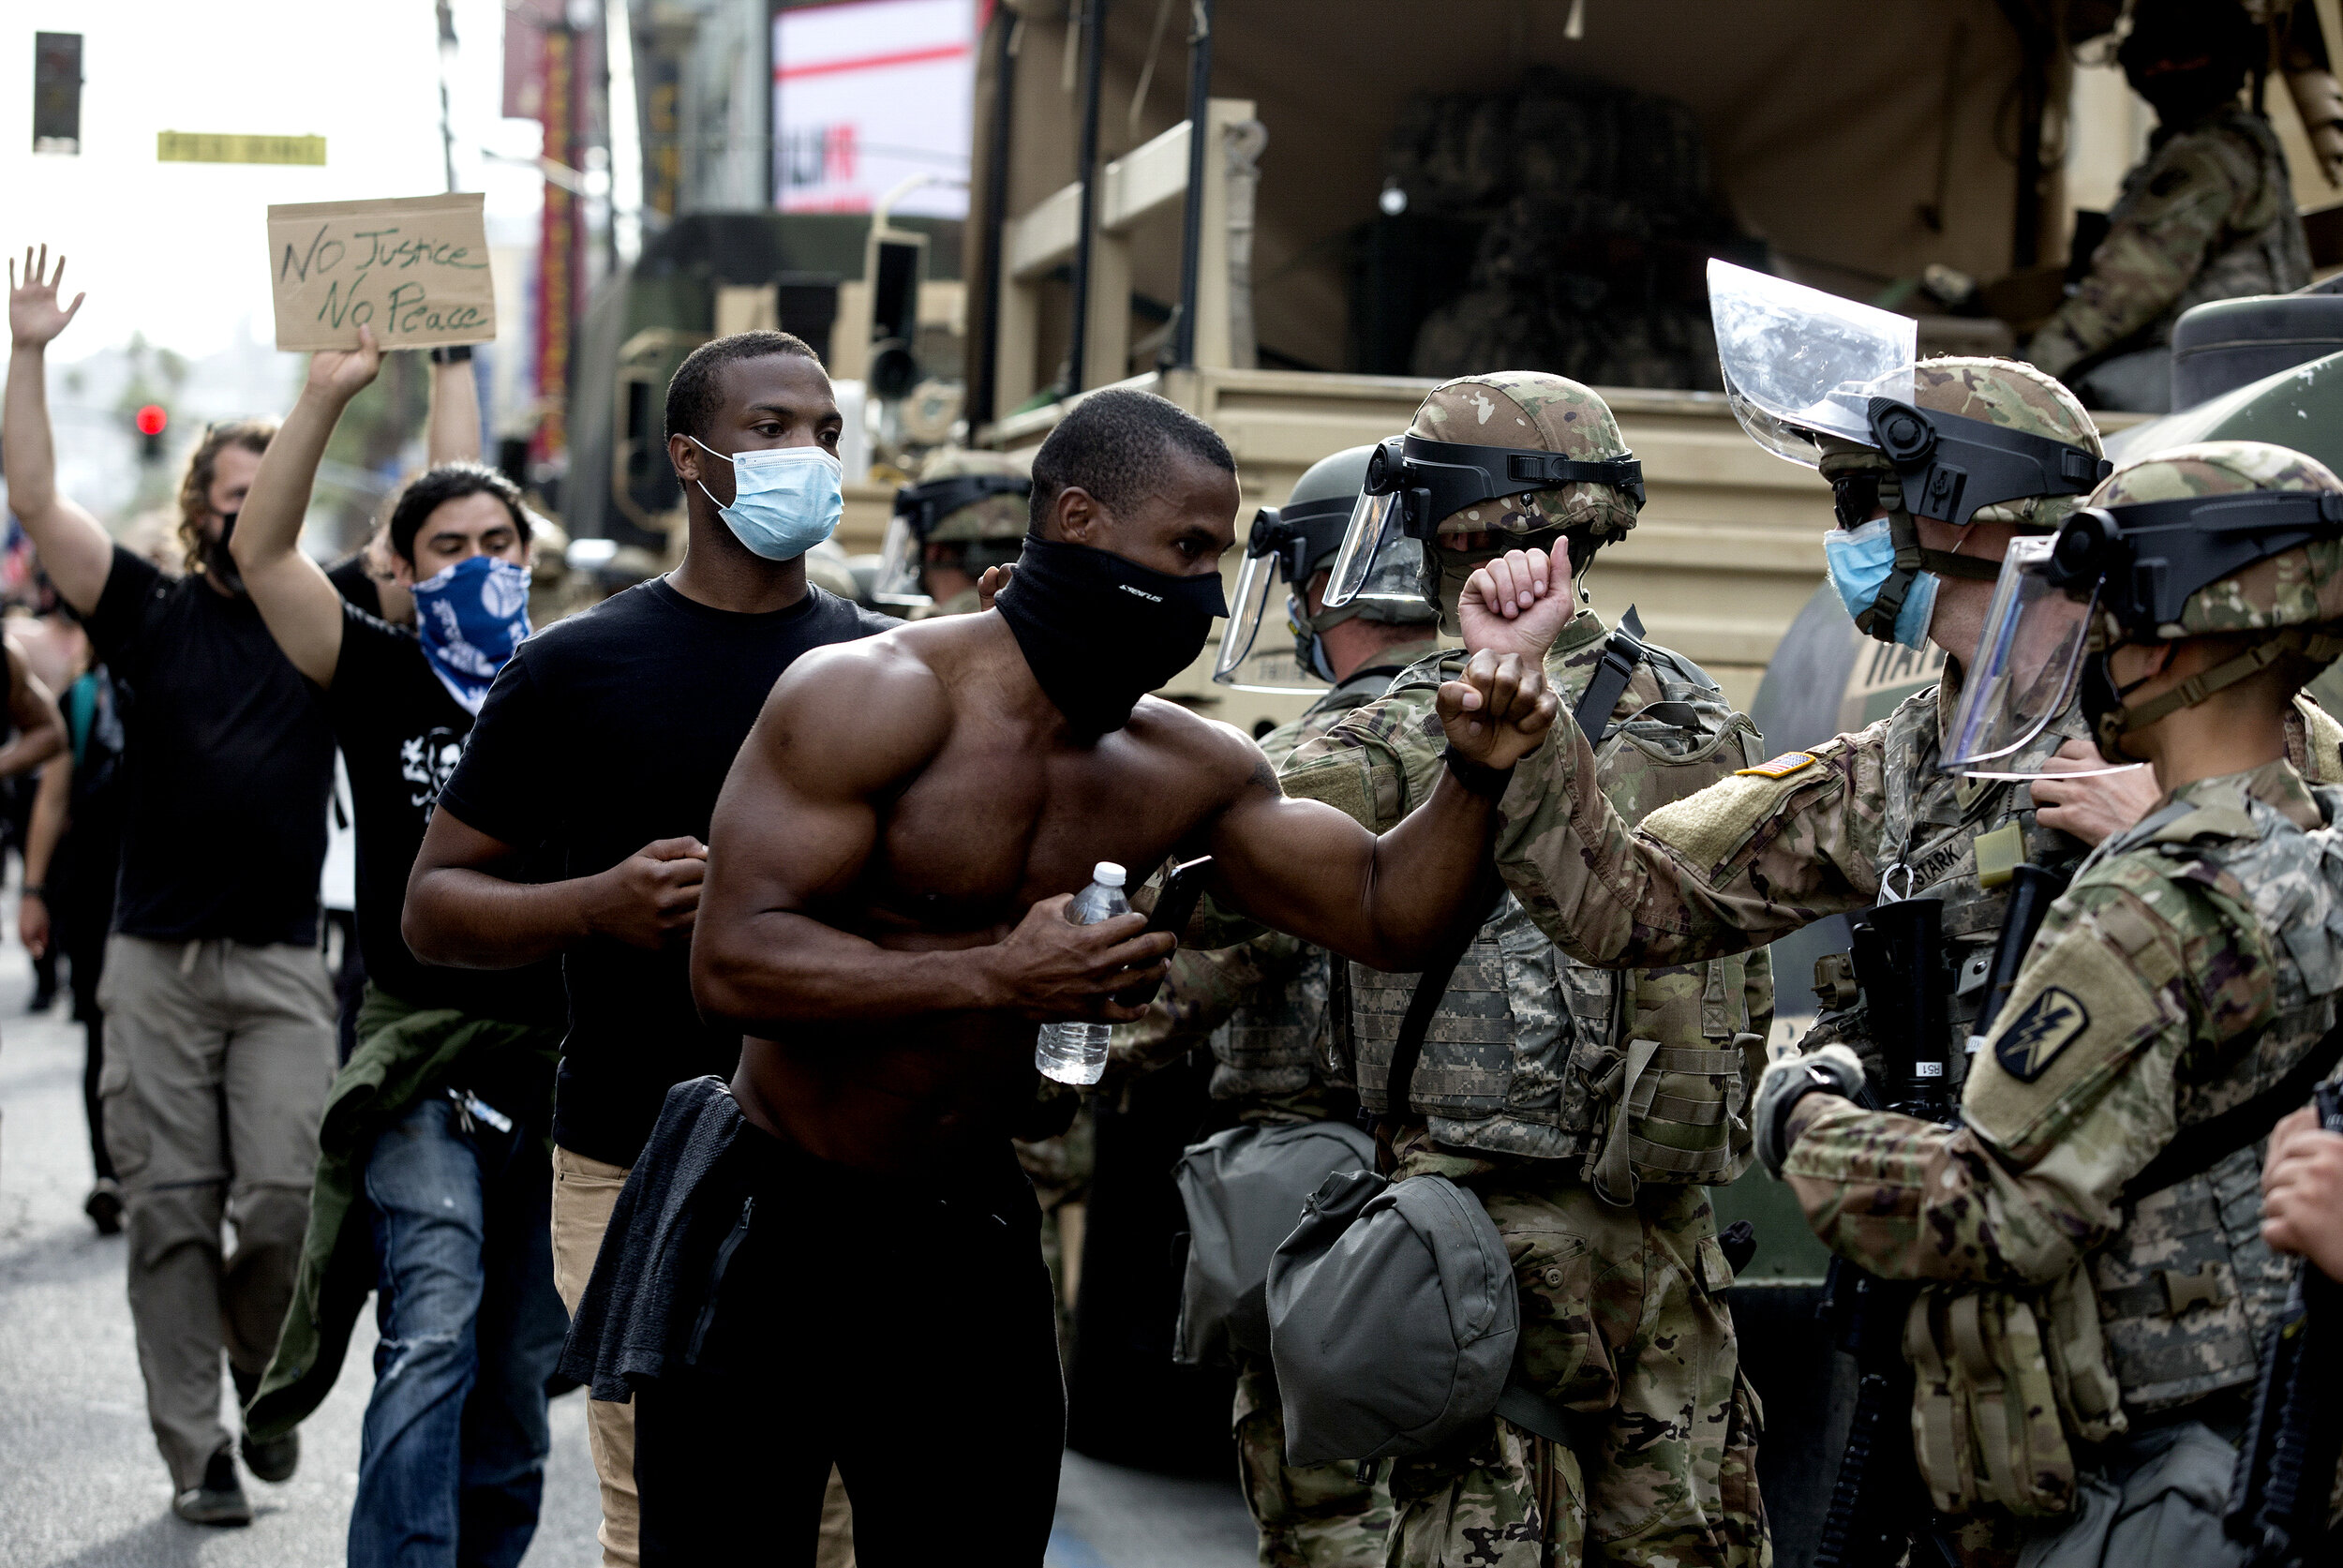  Demonstrators greet members of the National Guard as they march along Hollywood Boulevard during a protest over the death of George Floyd who died May 25 after he was restrained by Minneapolis police, Tuesday, June 2, 2020, in the Hollywood section 